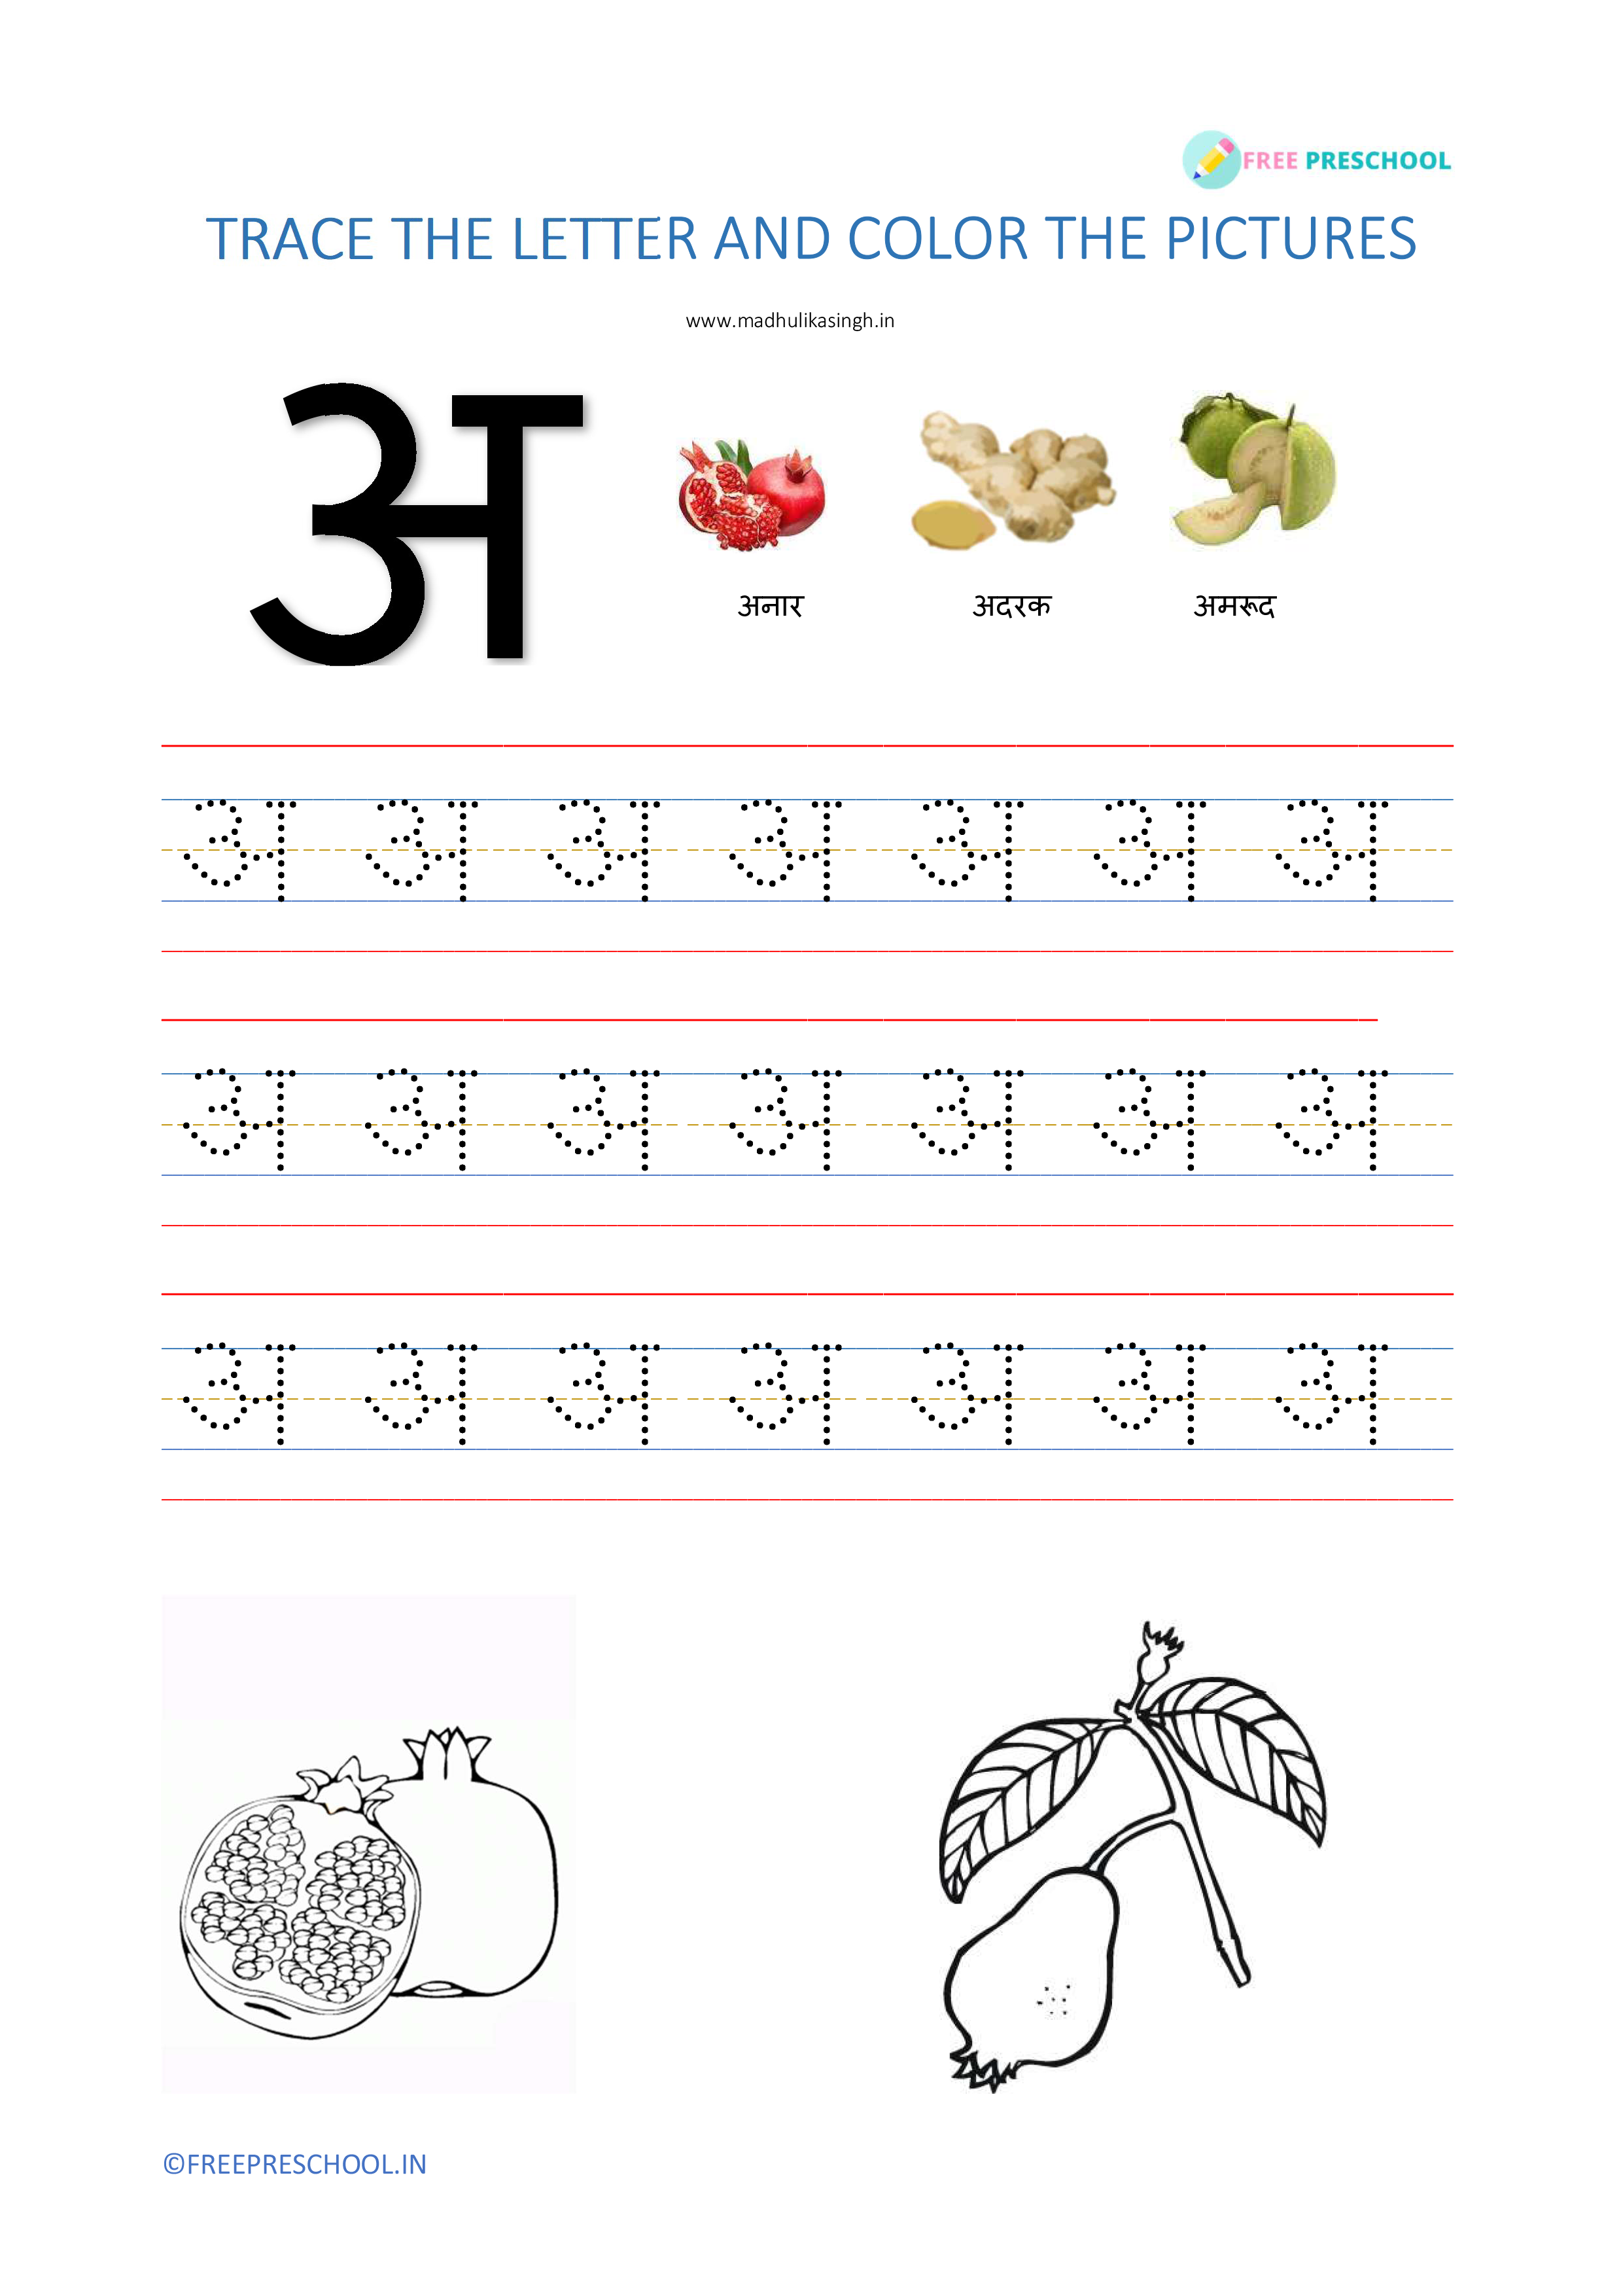 Hindi Alphabet Tracing Worksheets Printable Pdf- अ To ज्ञ- 56 Pages - Free Preschool